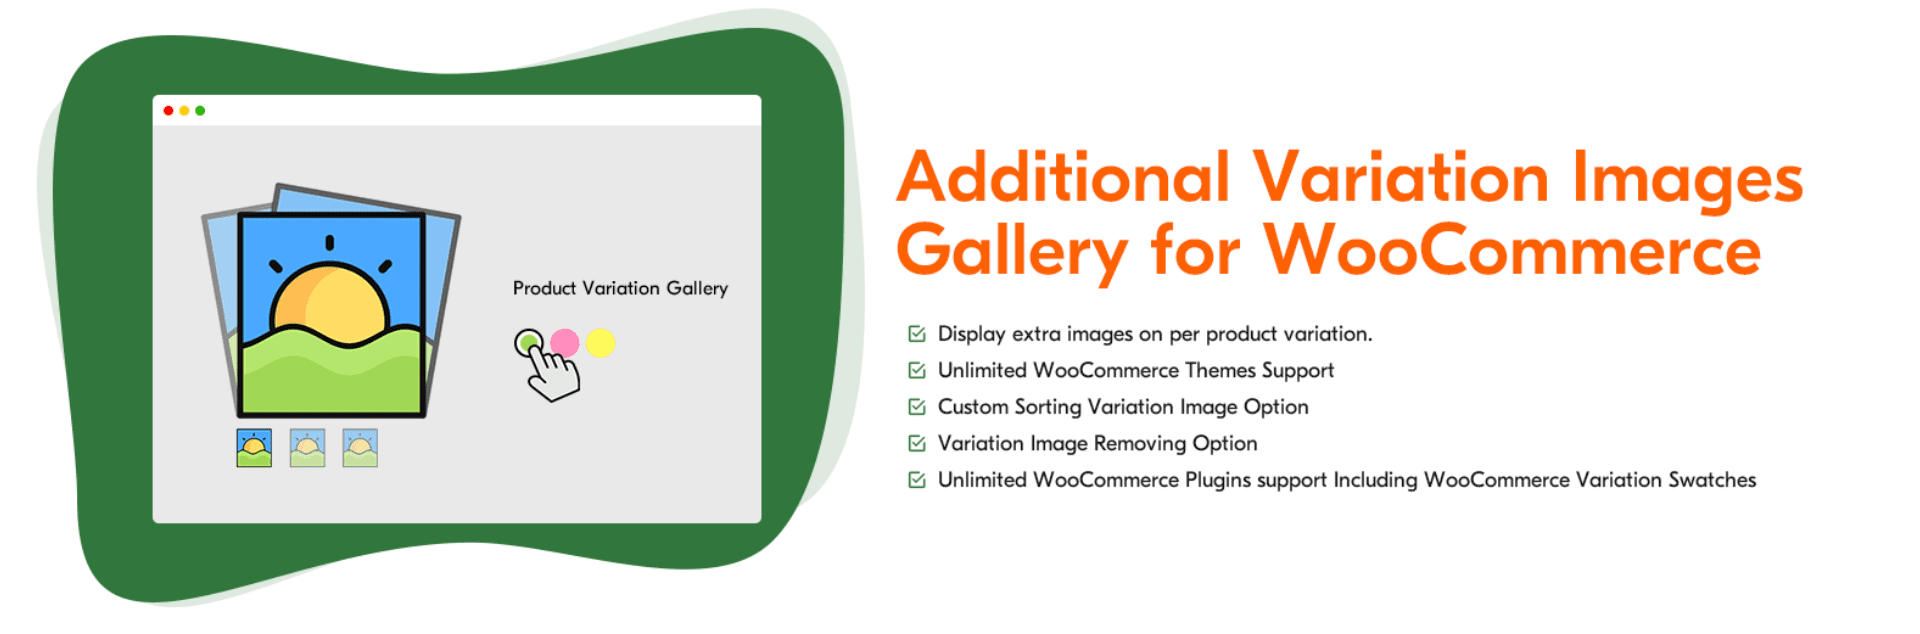 Additional Variation Images Gallery for WooCommerce.